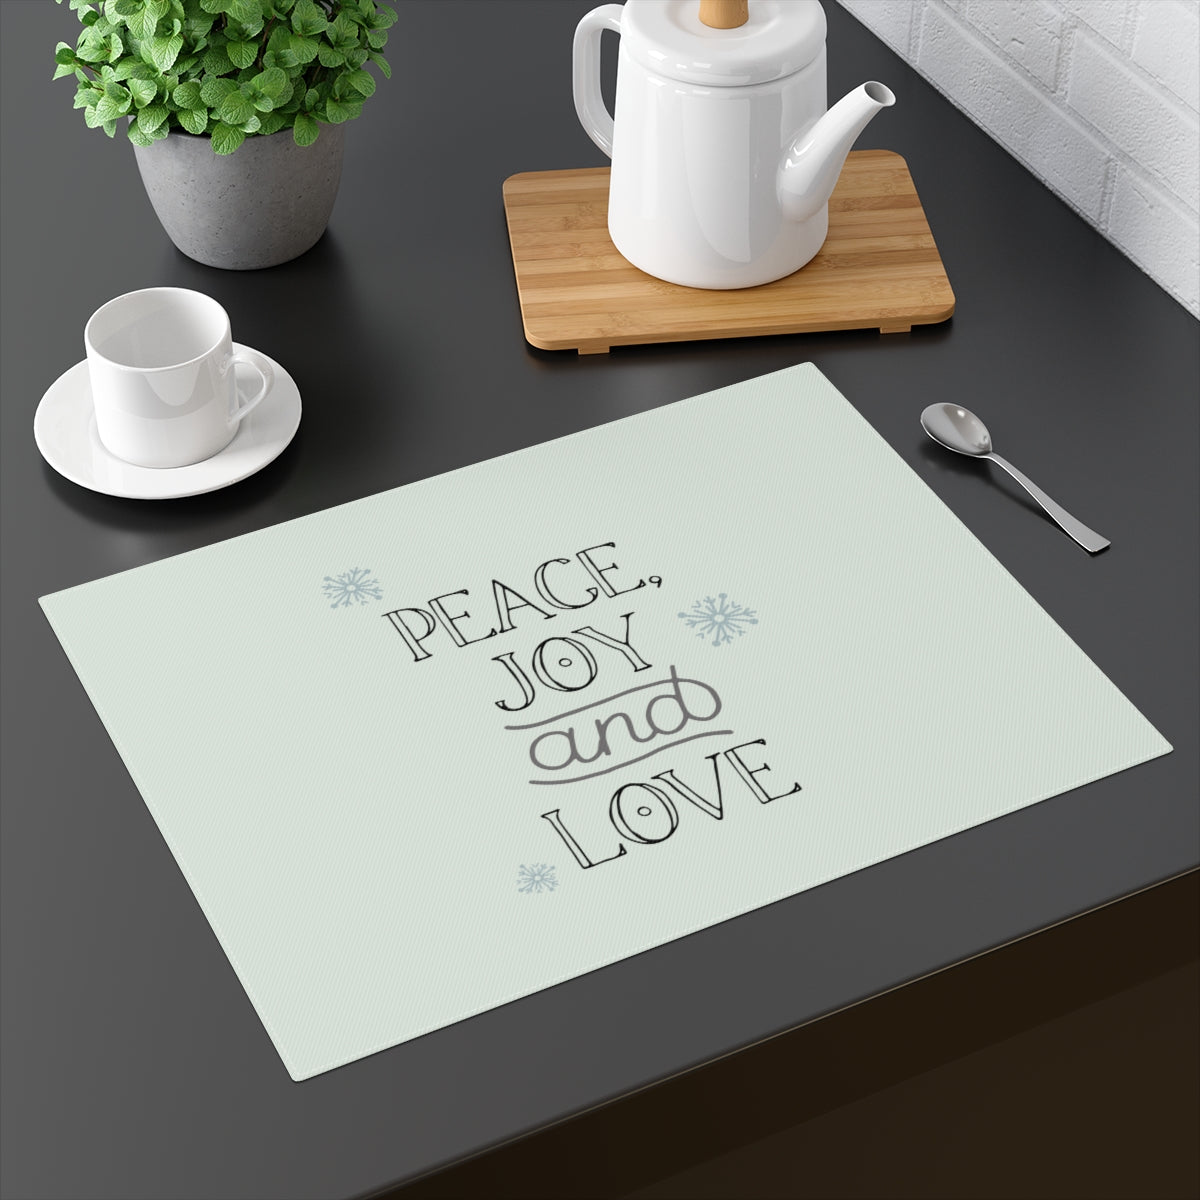 Holiday Table Placemat - Peace, Joy & Love